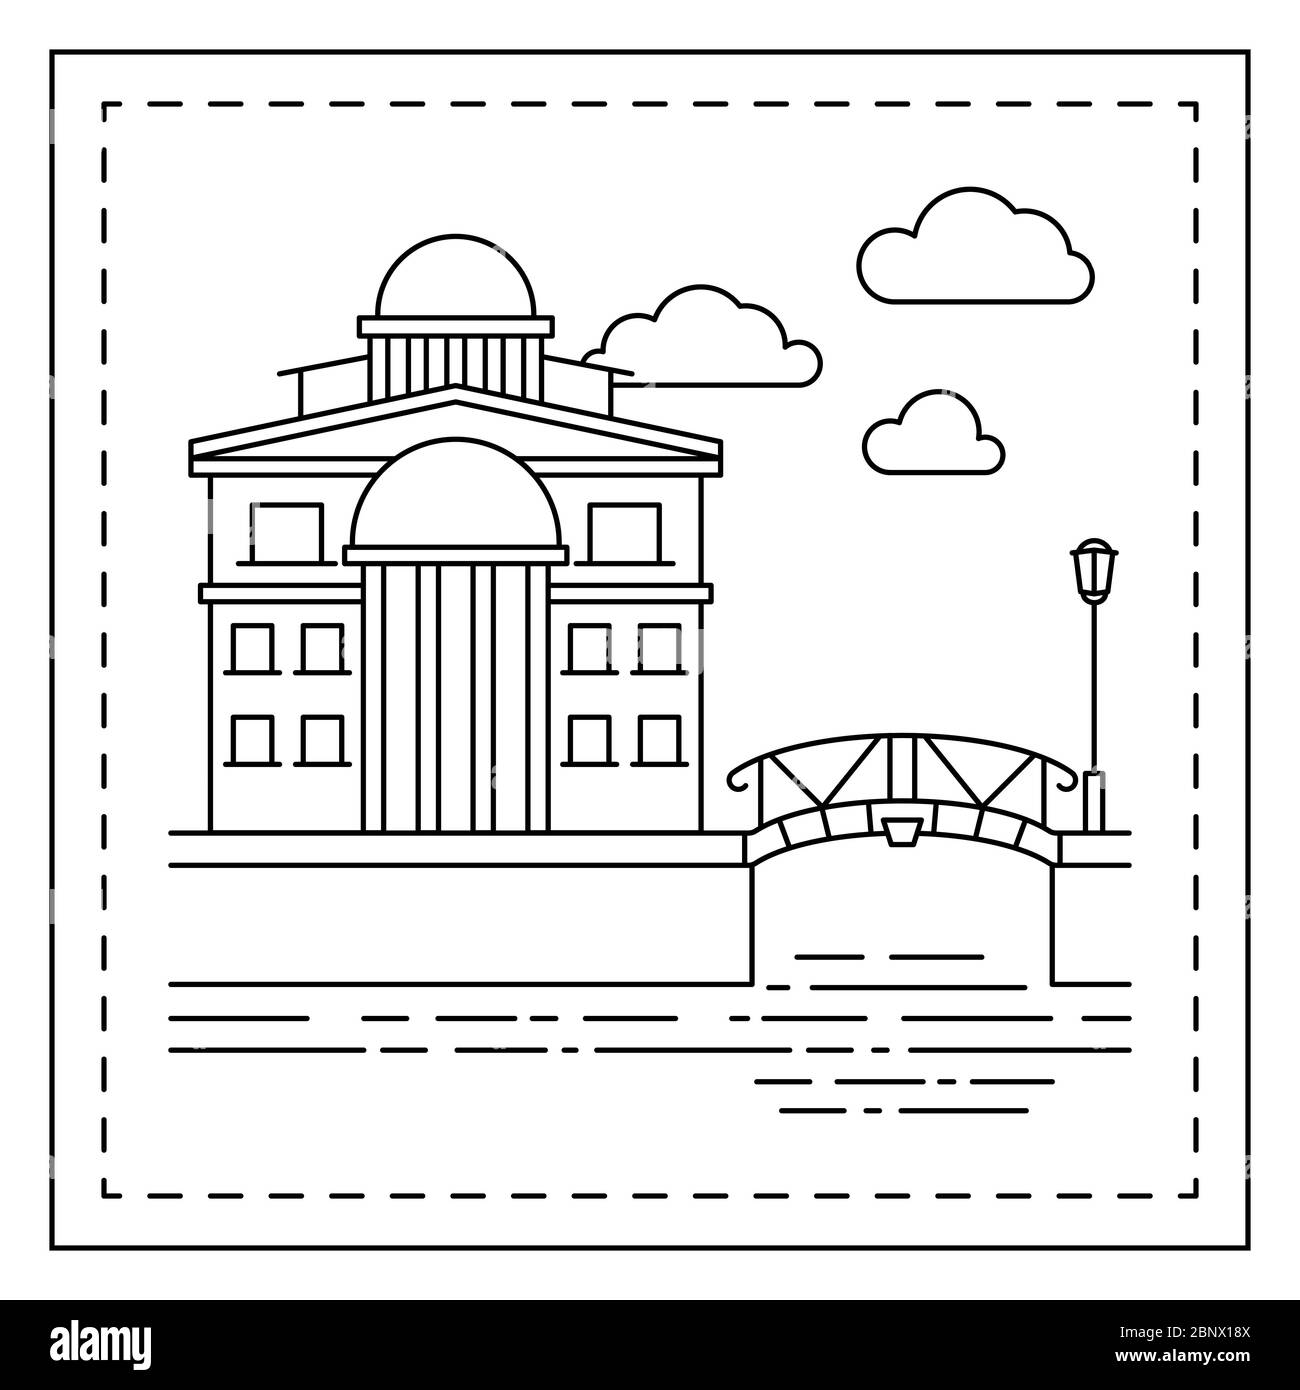 Coloring page for kids with house and bridge. Vector illustration Stock Vector